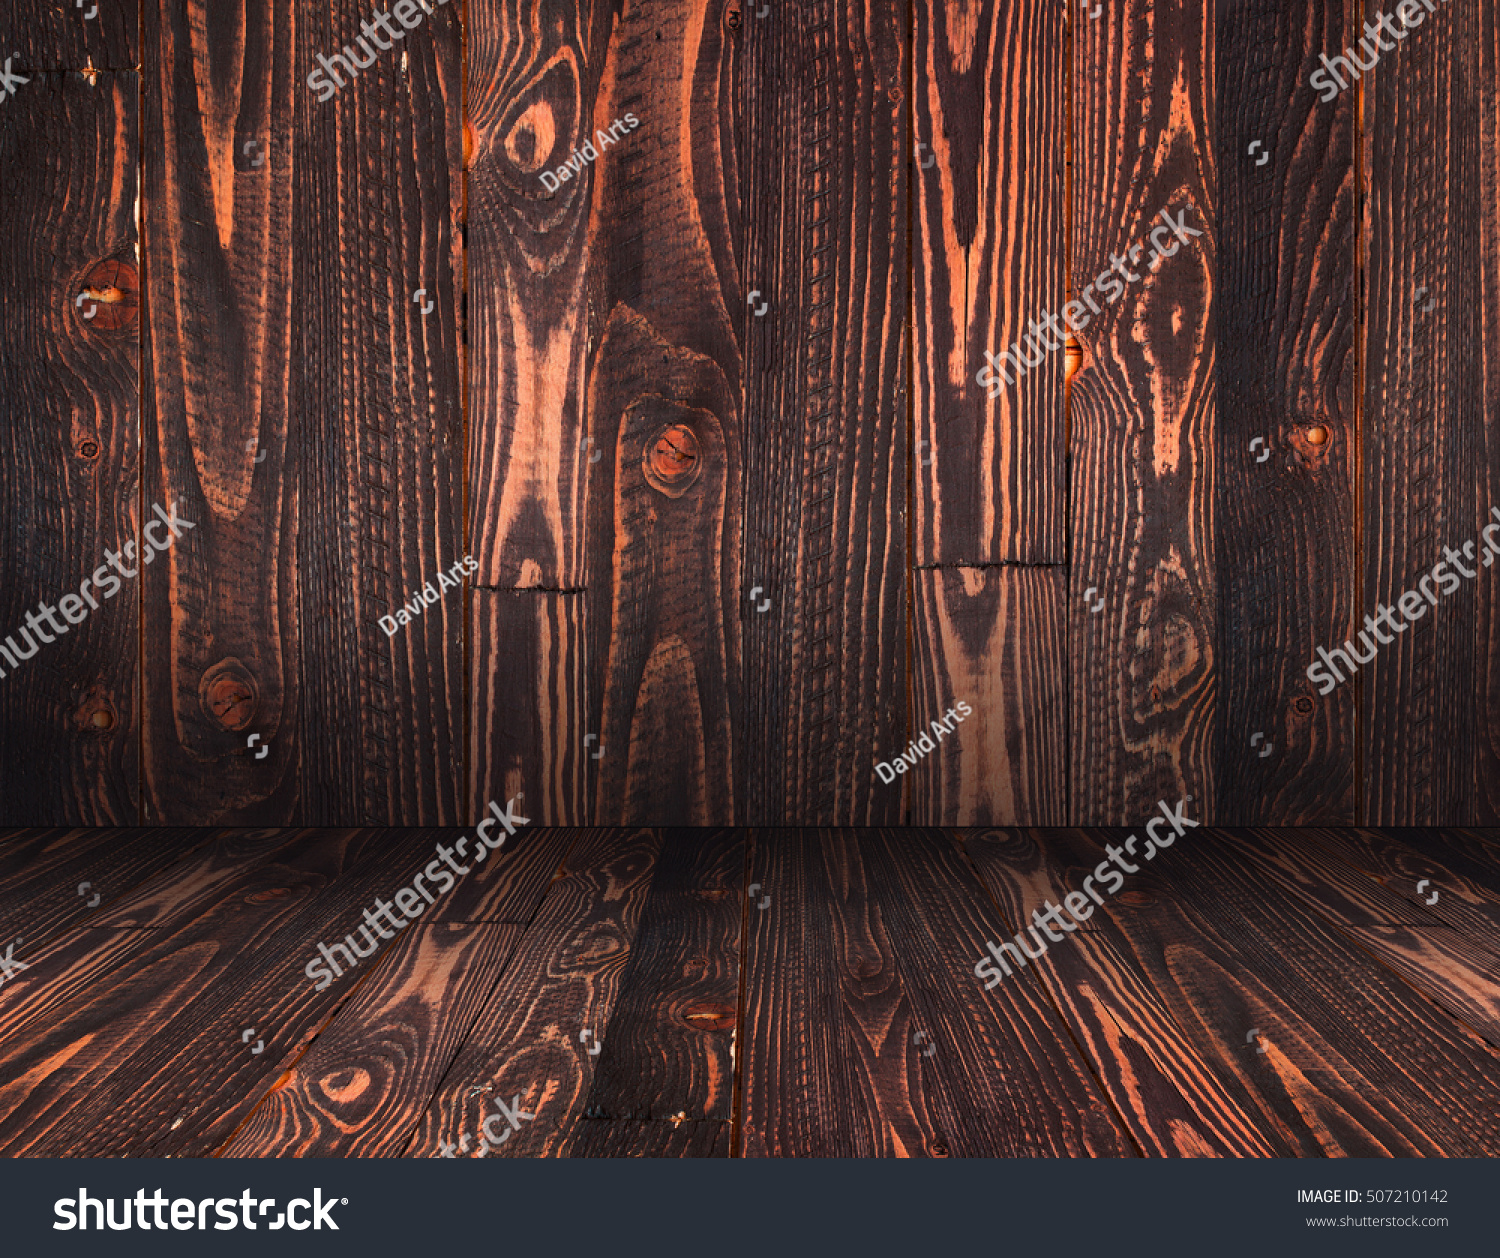 Natural Dark Wooden background. Old dirty wood tables or parquet with knots and holes and aged partculars. #507210142